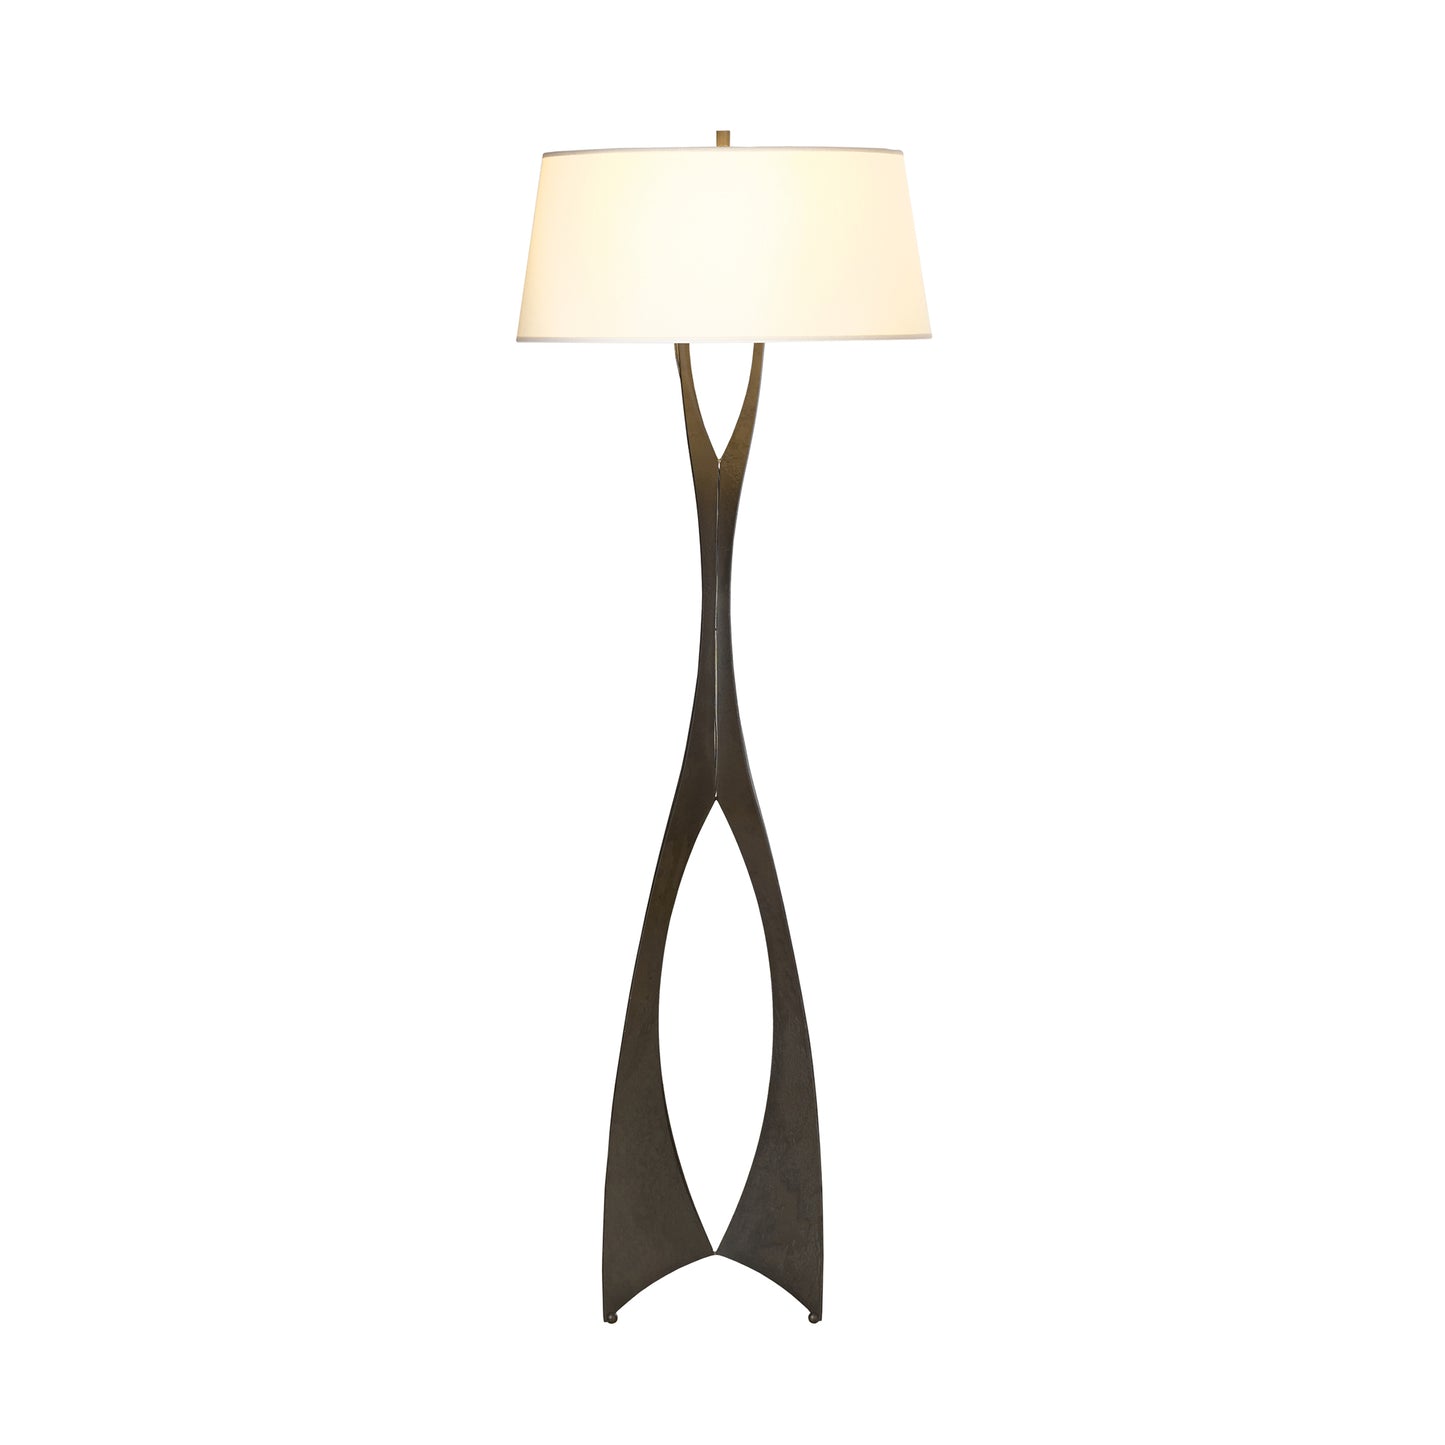 A Hubbardton Forge Moreau Floor Lamp with a metal base and a white shade.